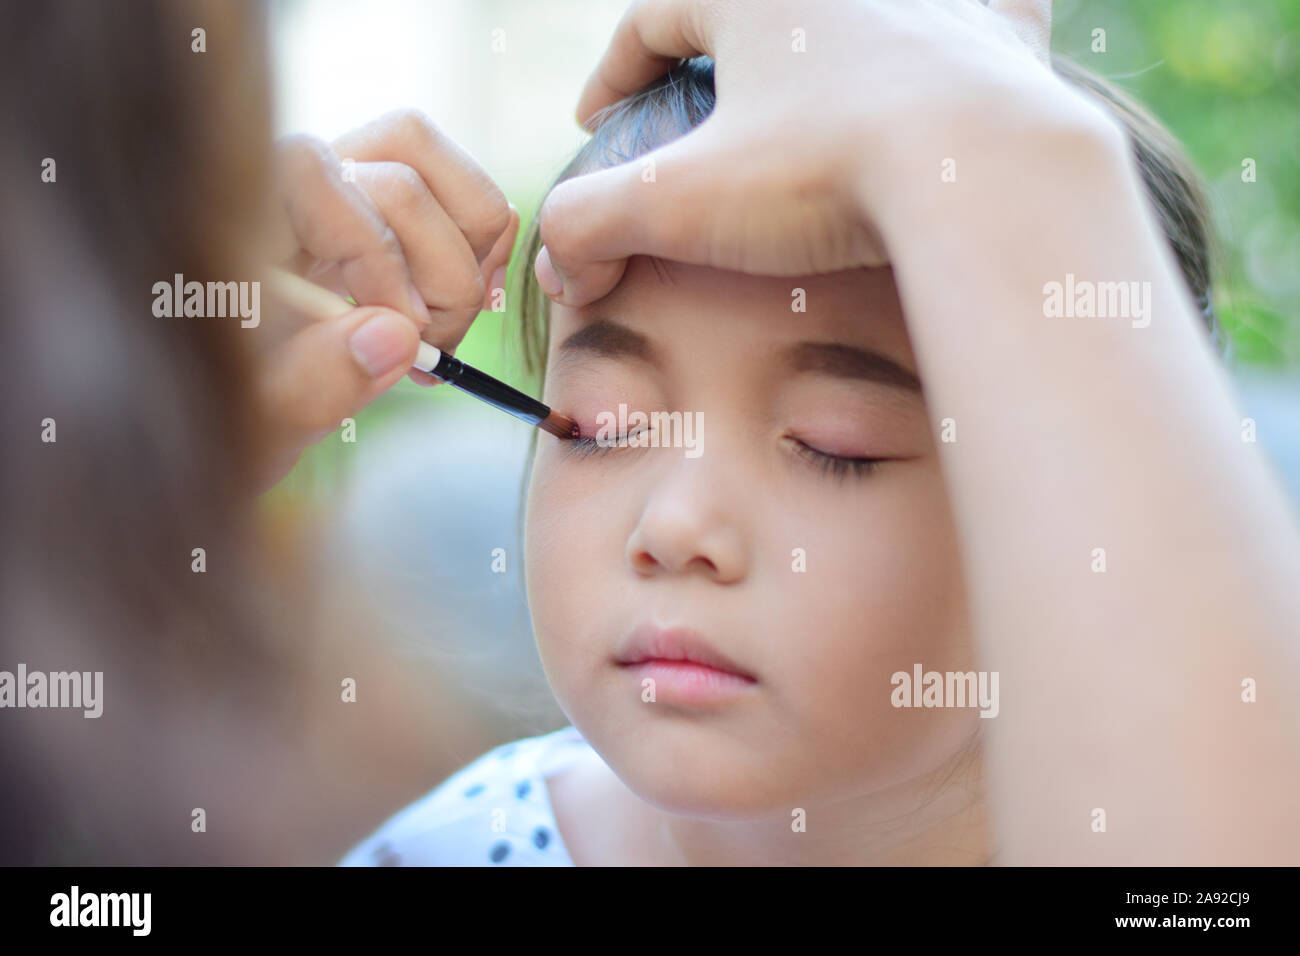 little girl getting her face for makeup by makeup artist Stock Photo